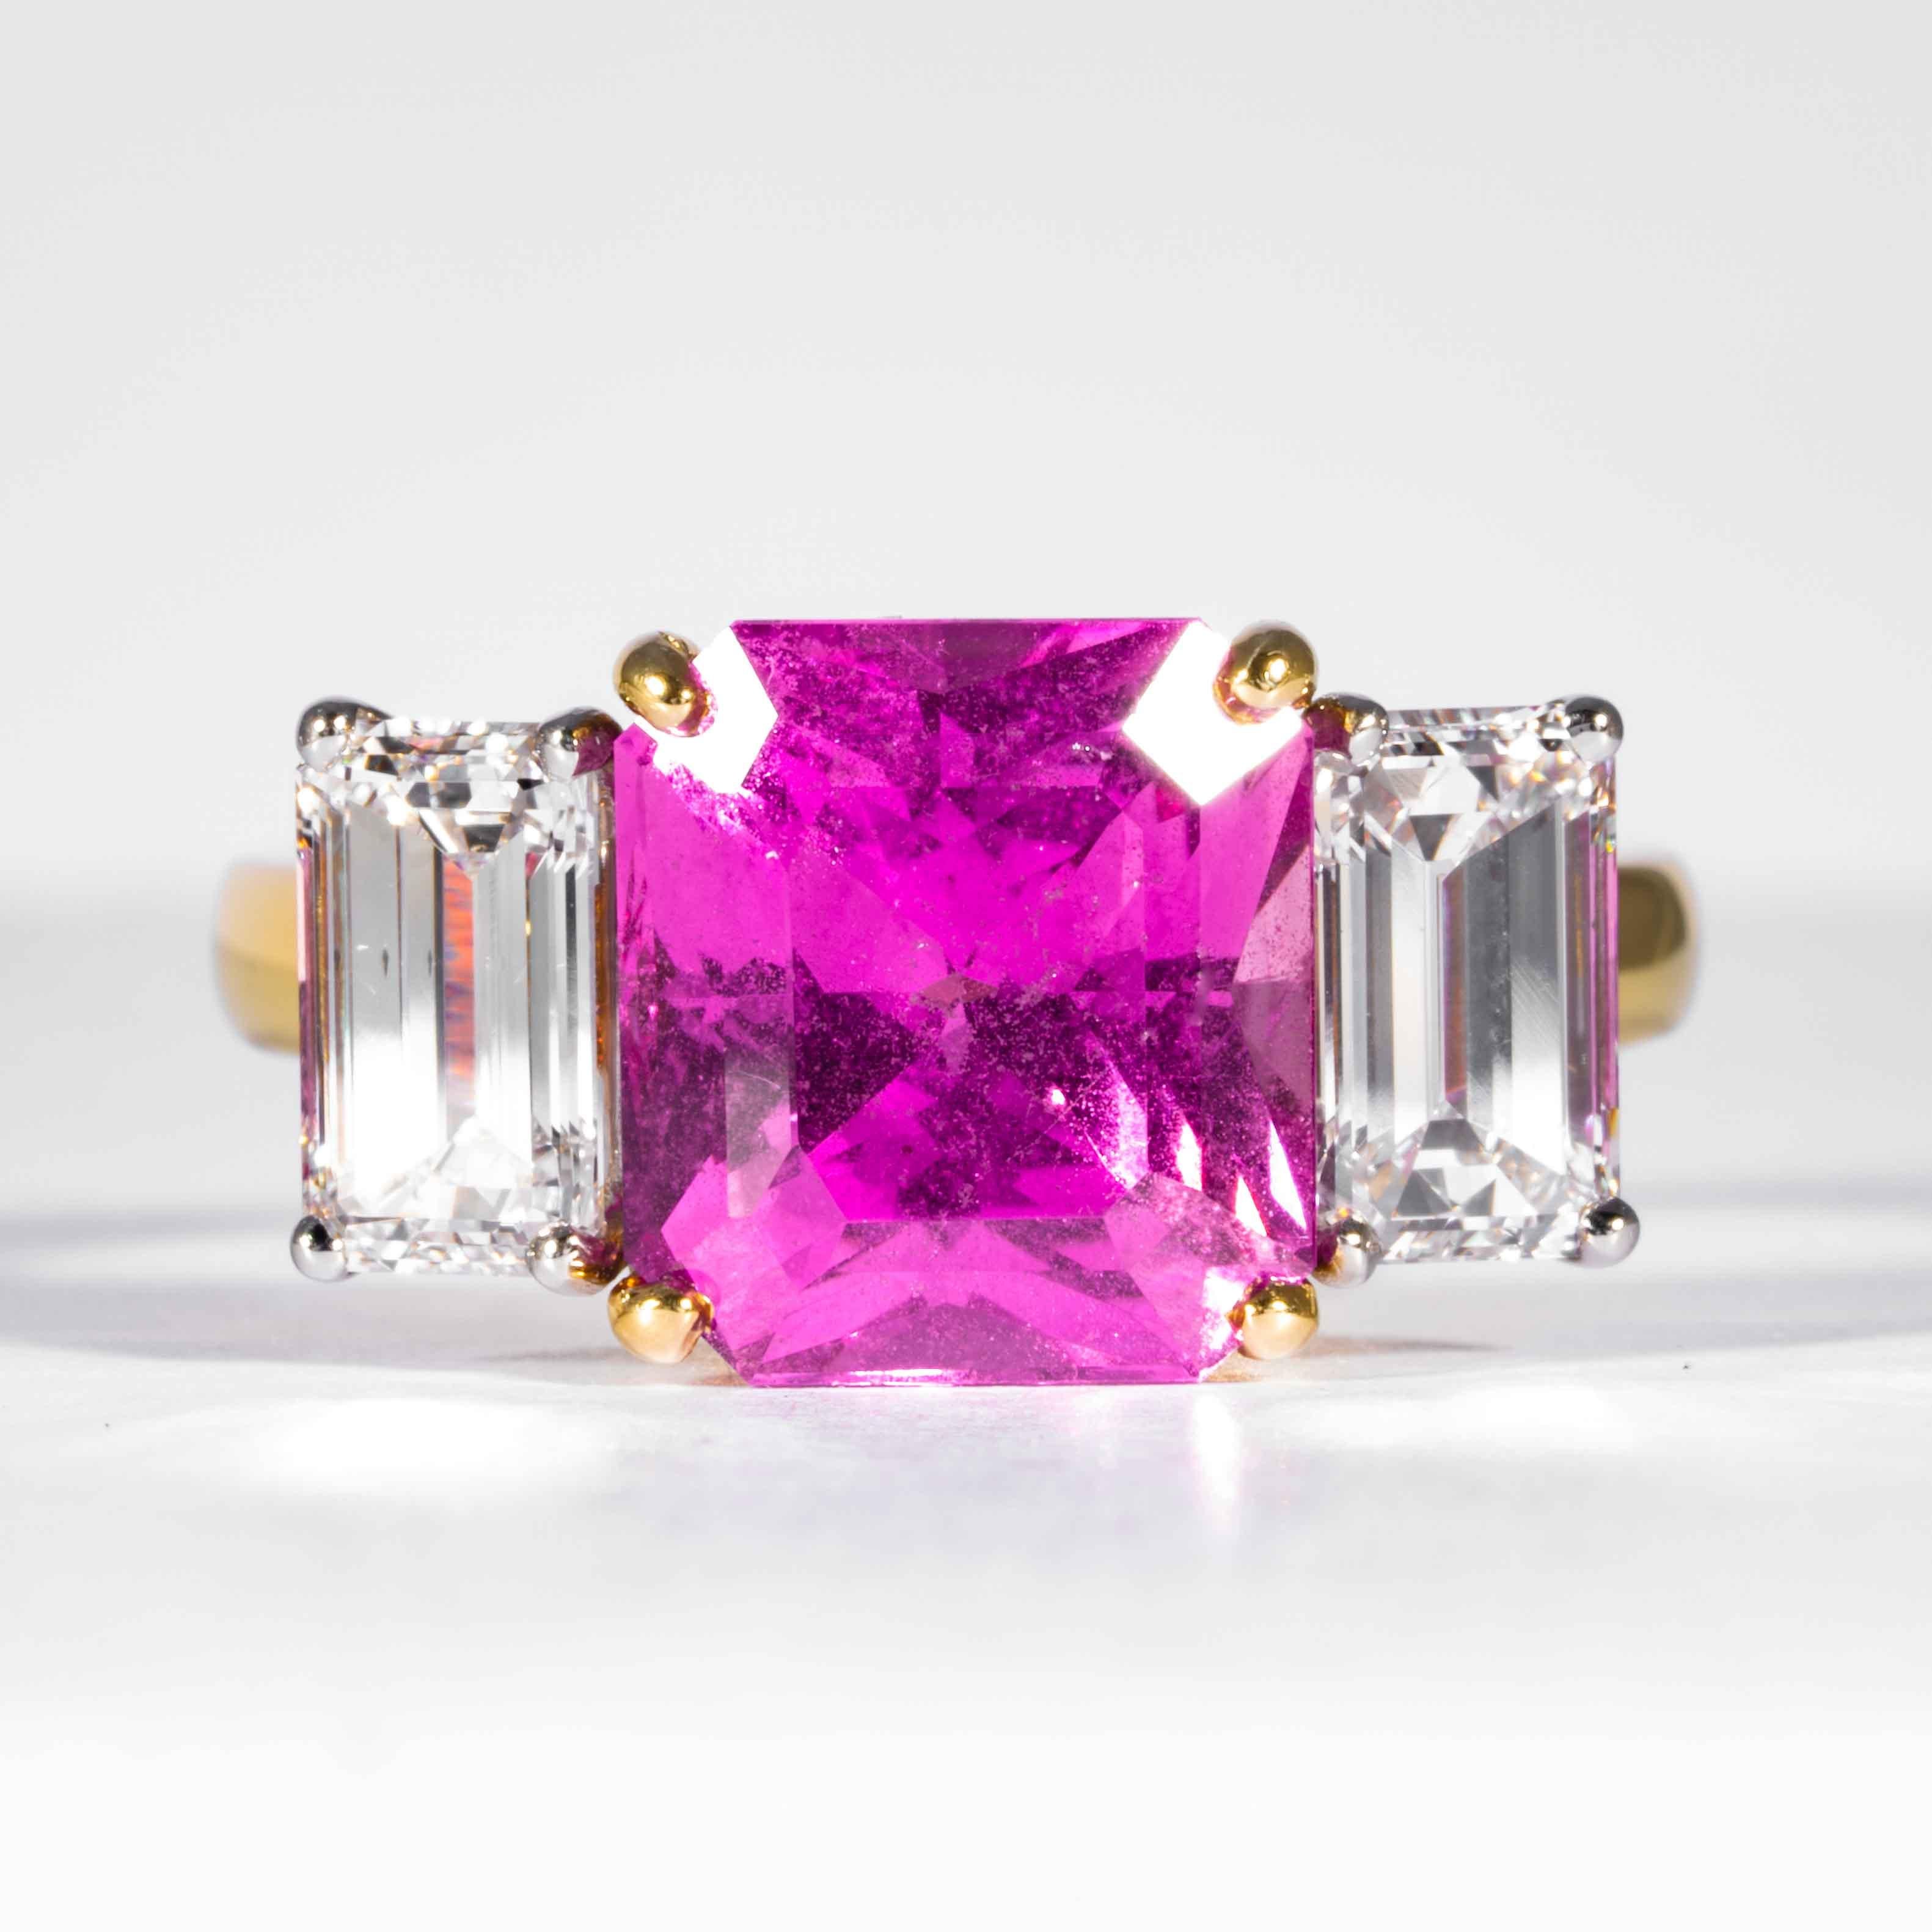 This sapphire and diamond 3-stone ring is offered by Shreve, Crump & Low. This radiant cut pink sapphire is custom set in a handcrafted Shreve, Crump & Low platinum and 18k yellow gold 3-stone ring, consisting of 1 vibrant radiant cut pink sapphire